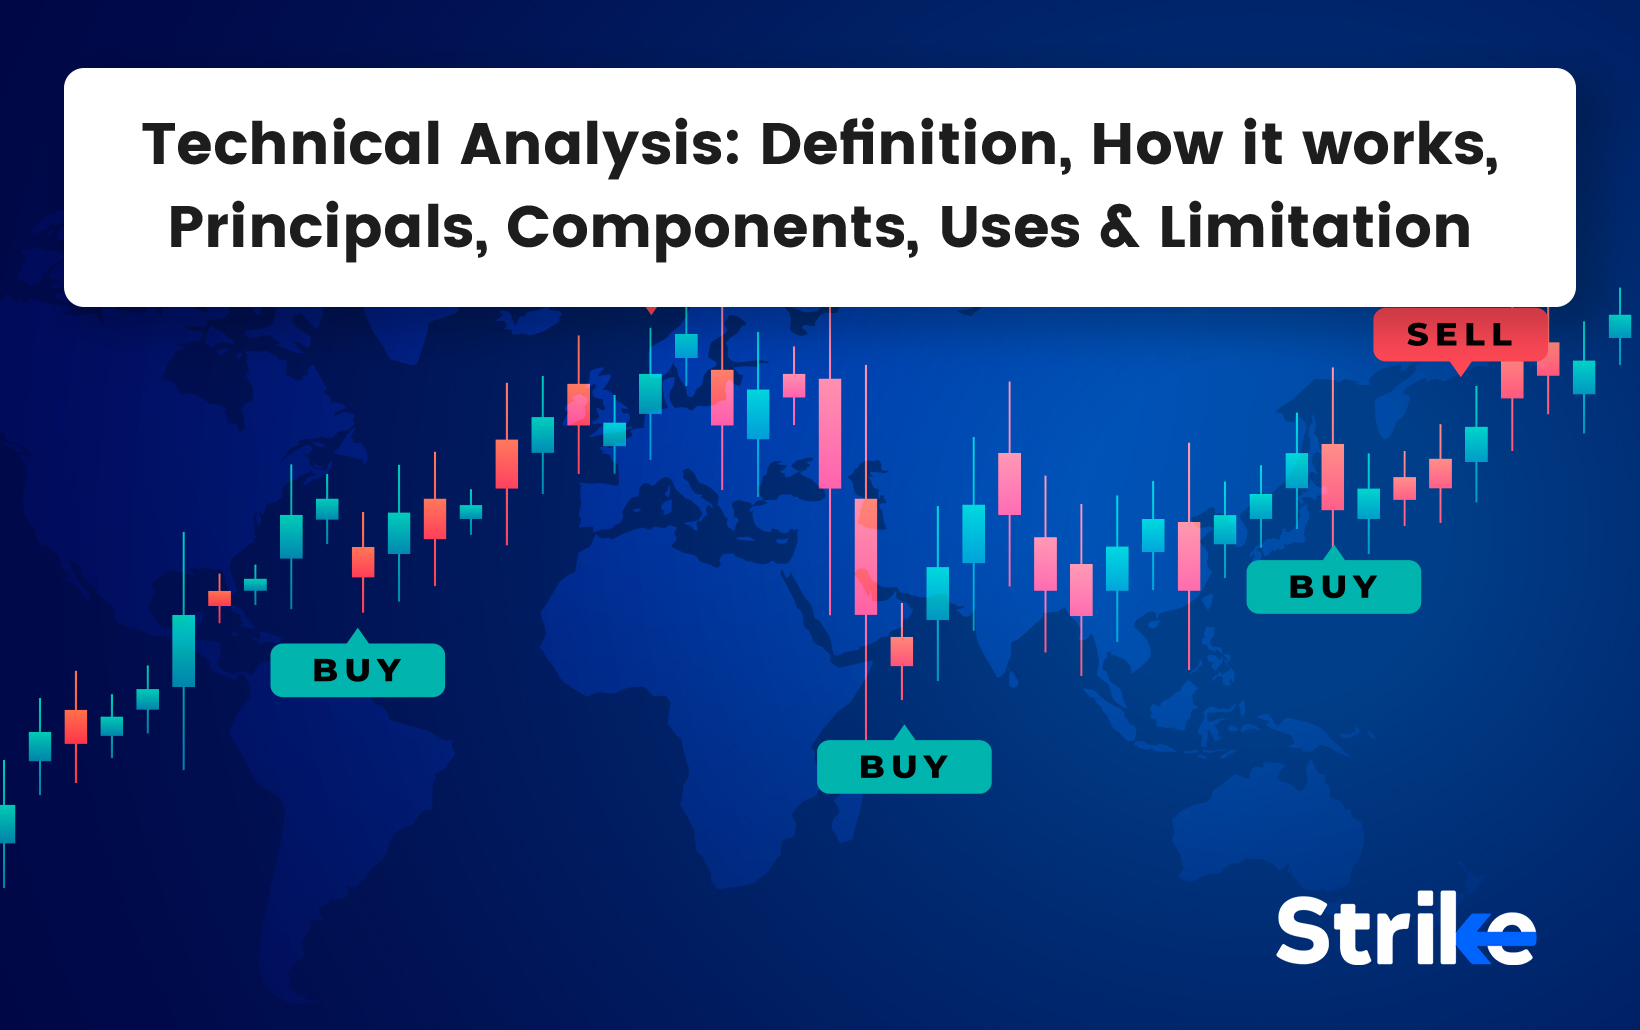 Technical Analysis: Definition, How it works, Principals, Components, Uses & Limitation